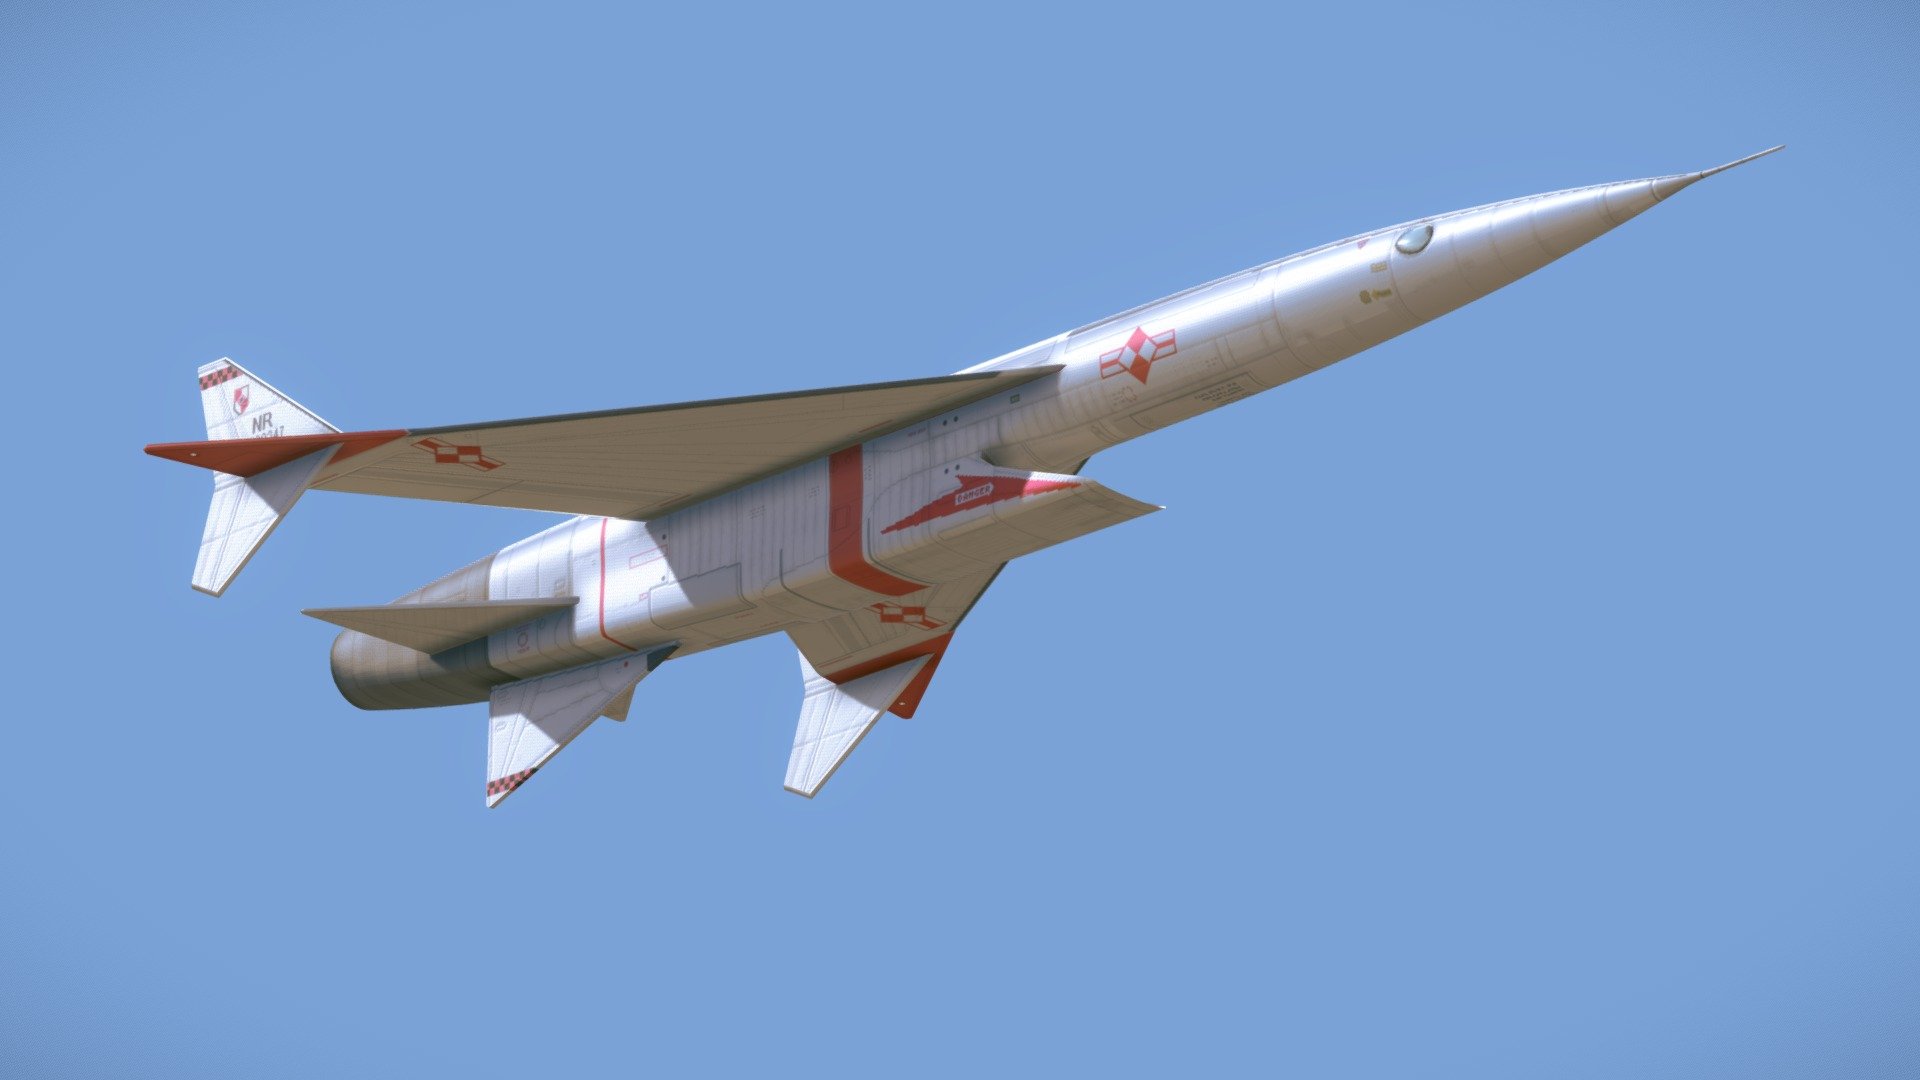 Fictional design of a Mach 3+ supersonic cold war interceptor, designed as a response to a rival nation’s fleet of supposed atom bombers. Rapid take-off is achieved with JATO bottle rockets and weapons are stored internally. A deployable periscope is used during landing and takeoff for better aerodynamics.

Inspired originally by the unbuilt Republic Aviation XF-103 “Thunderwarrior” interceptor and several cold-war era cruise missiles 3d model